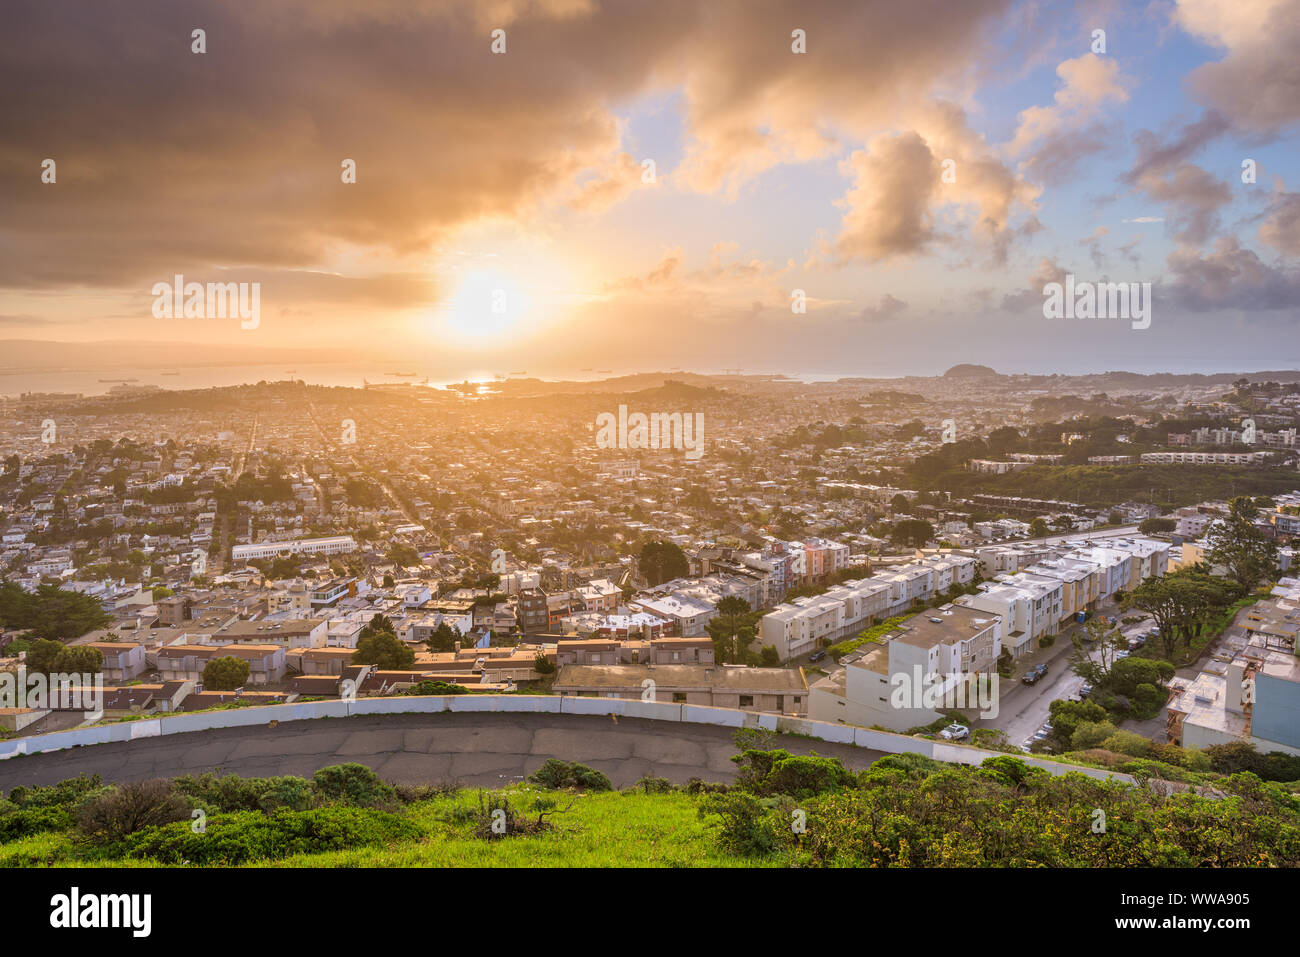 San Francisco, California, USA skyline from Twin Peaks in the morning. Stock Photo